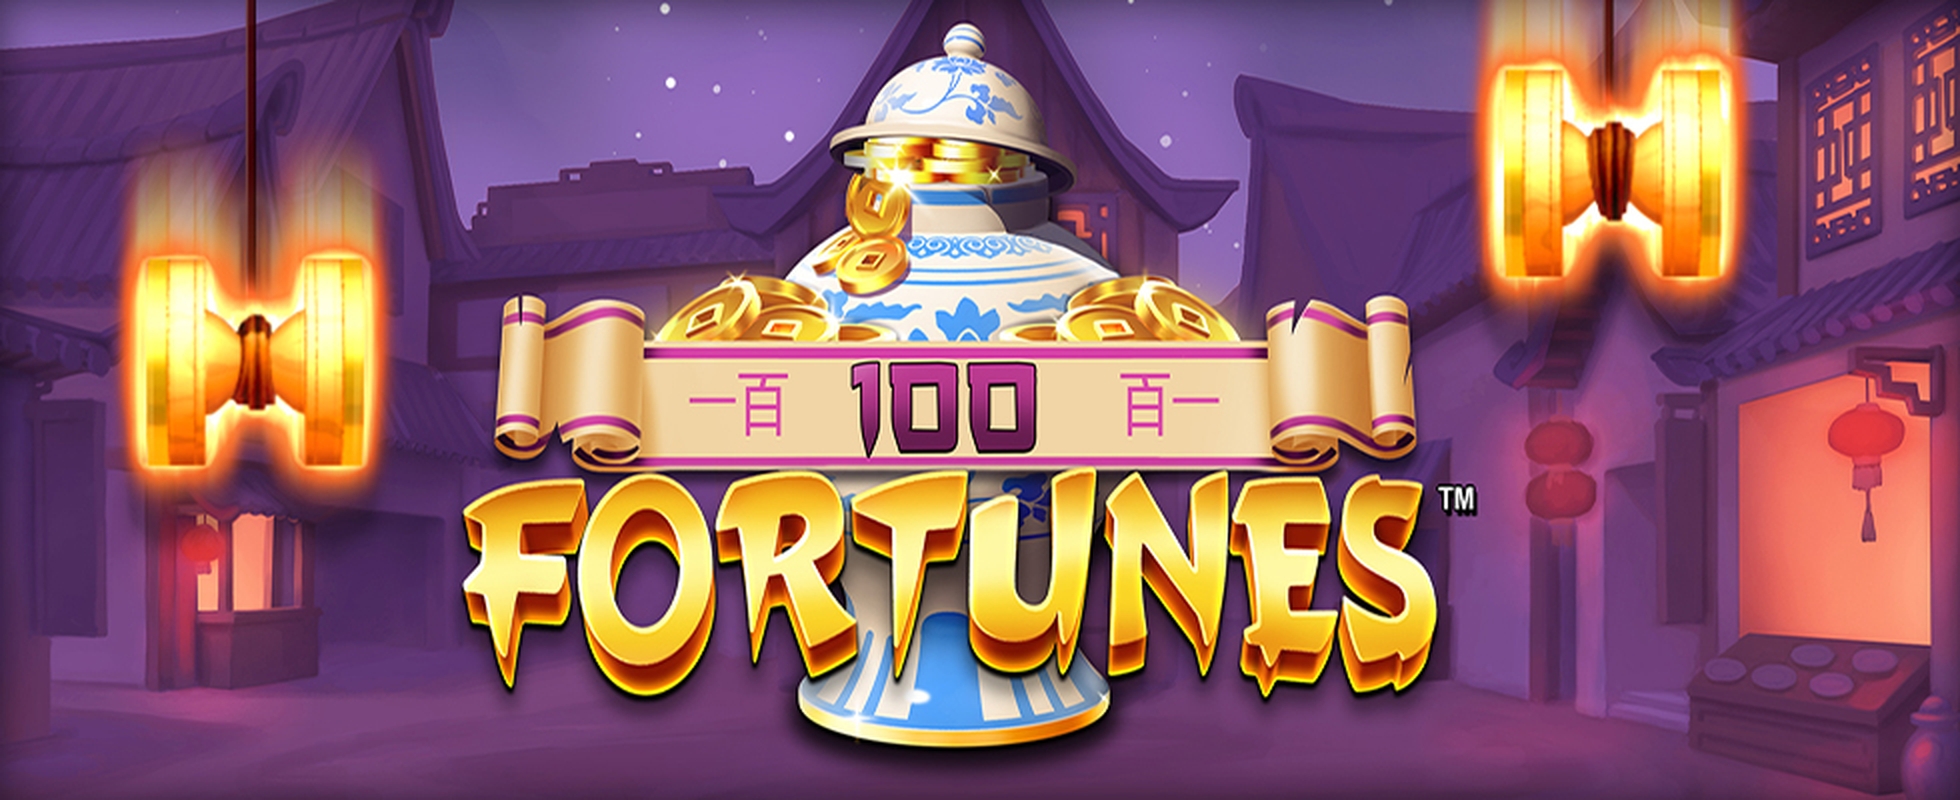 The 100 Fortunes Online Slot Demo Game by Northern Lights Gaming